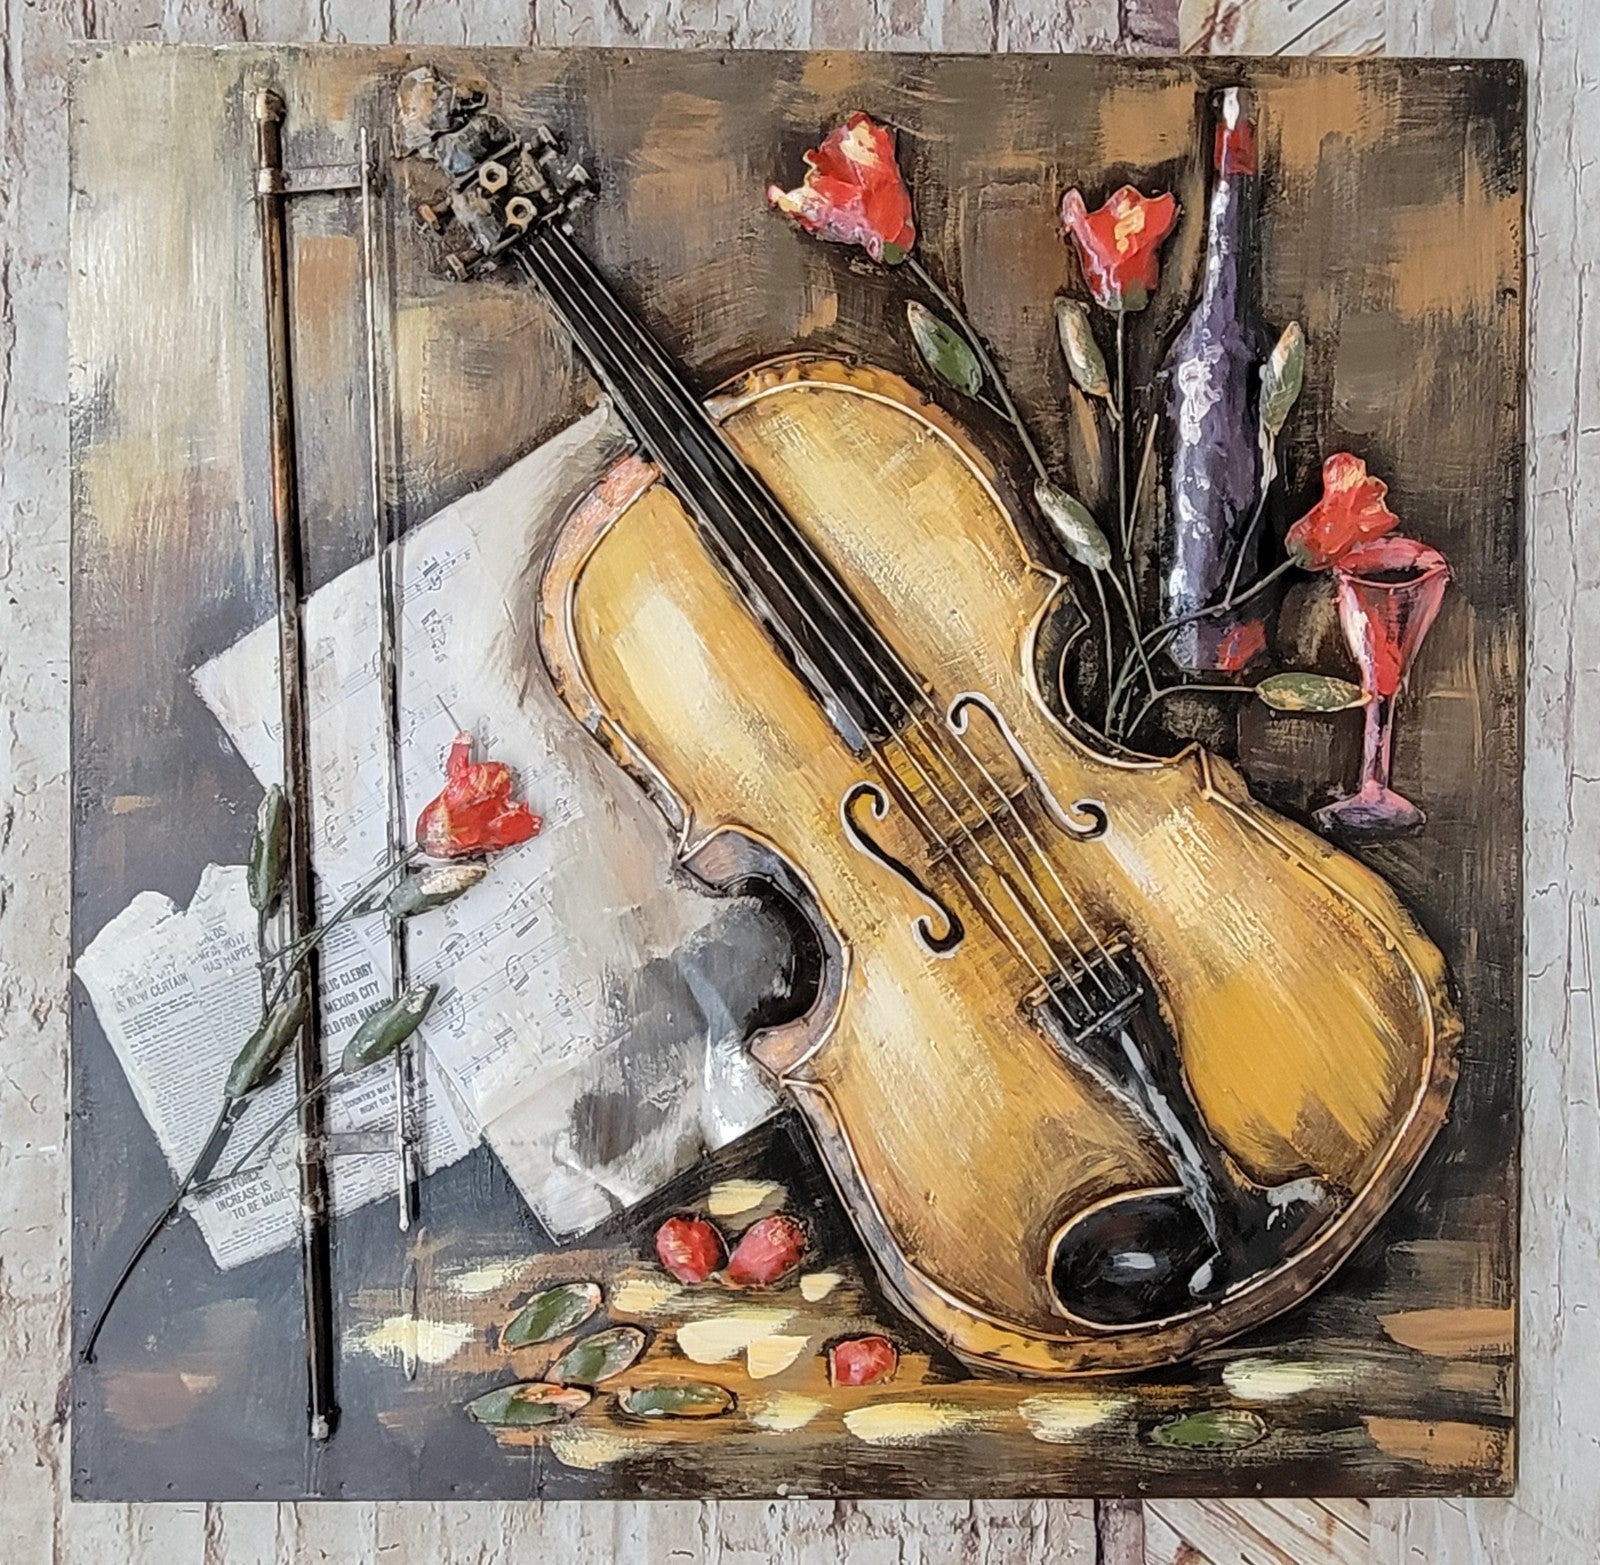 Celebrate your love of music with a hand-picked piece of fine art 3-D